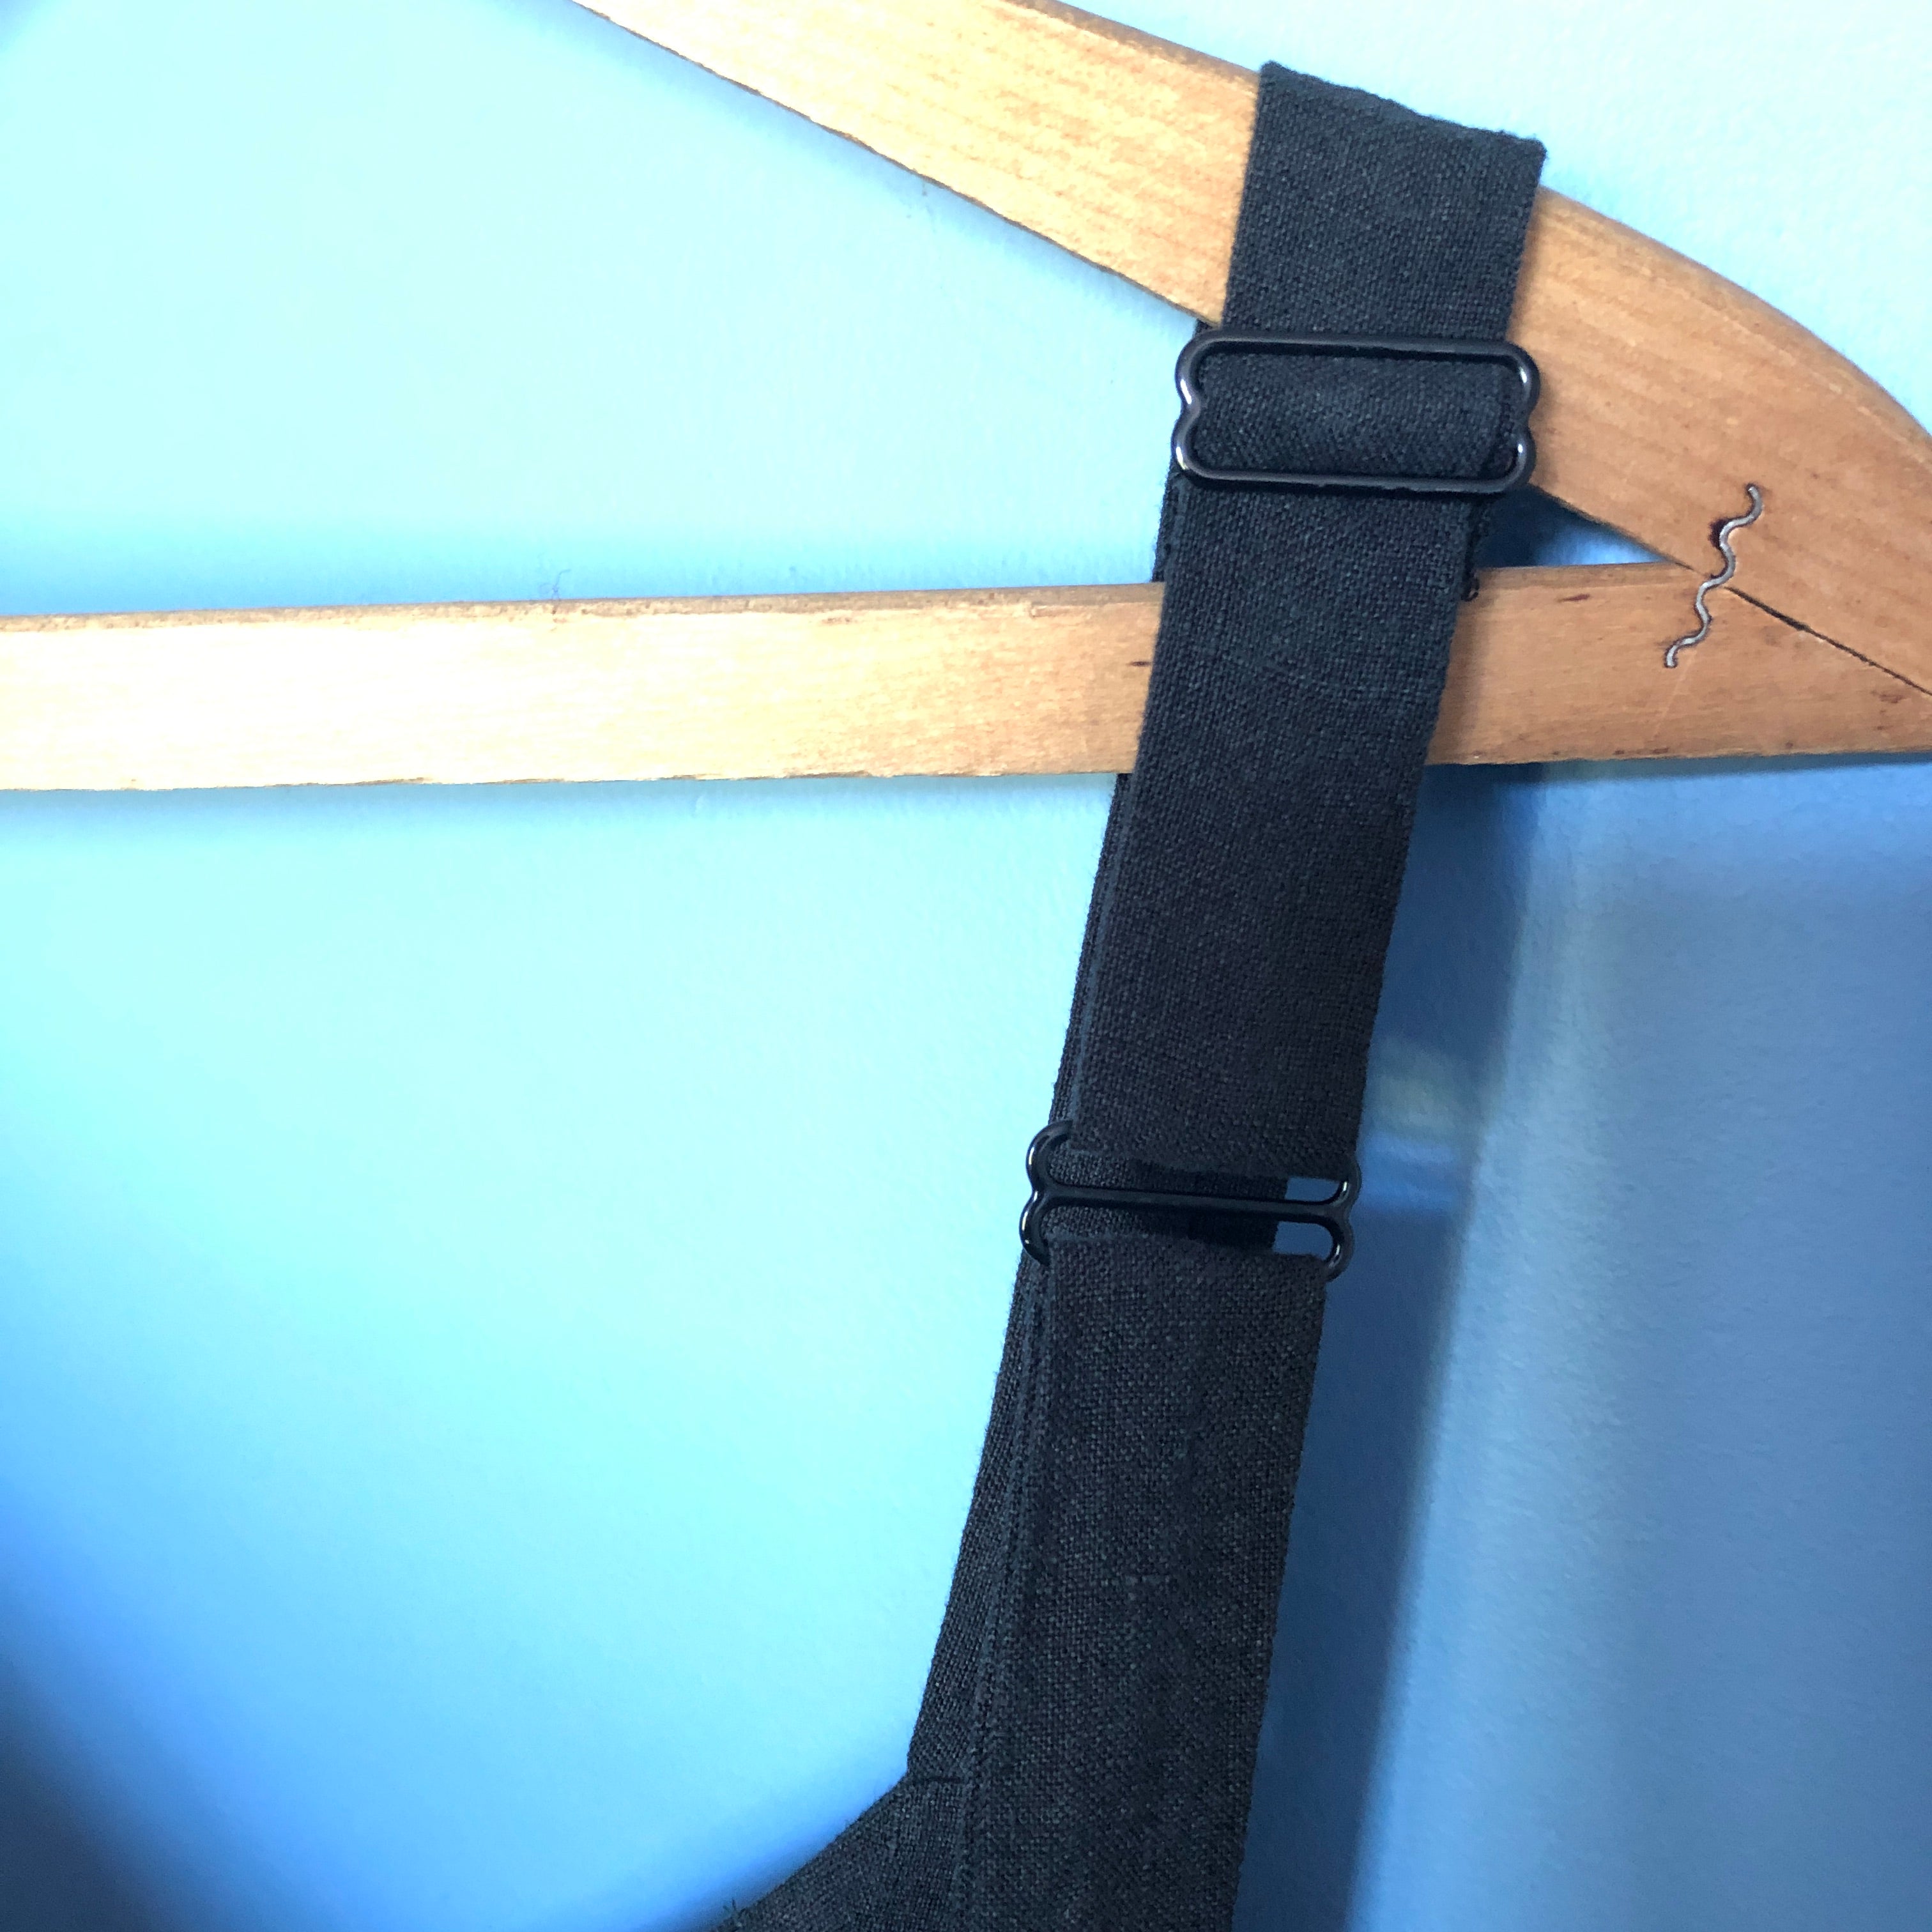 How to Sew Adjustable Bra Straps – Tailor Made Blog